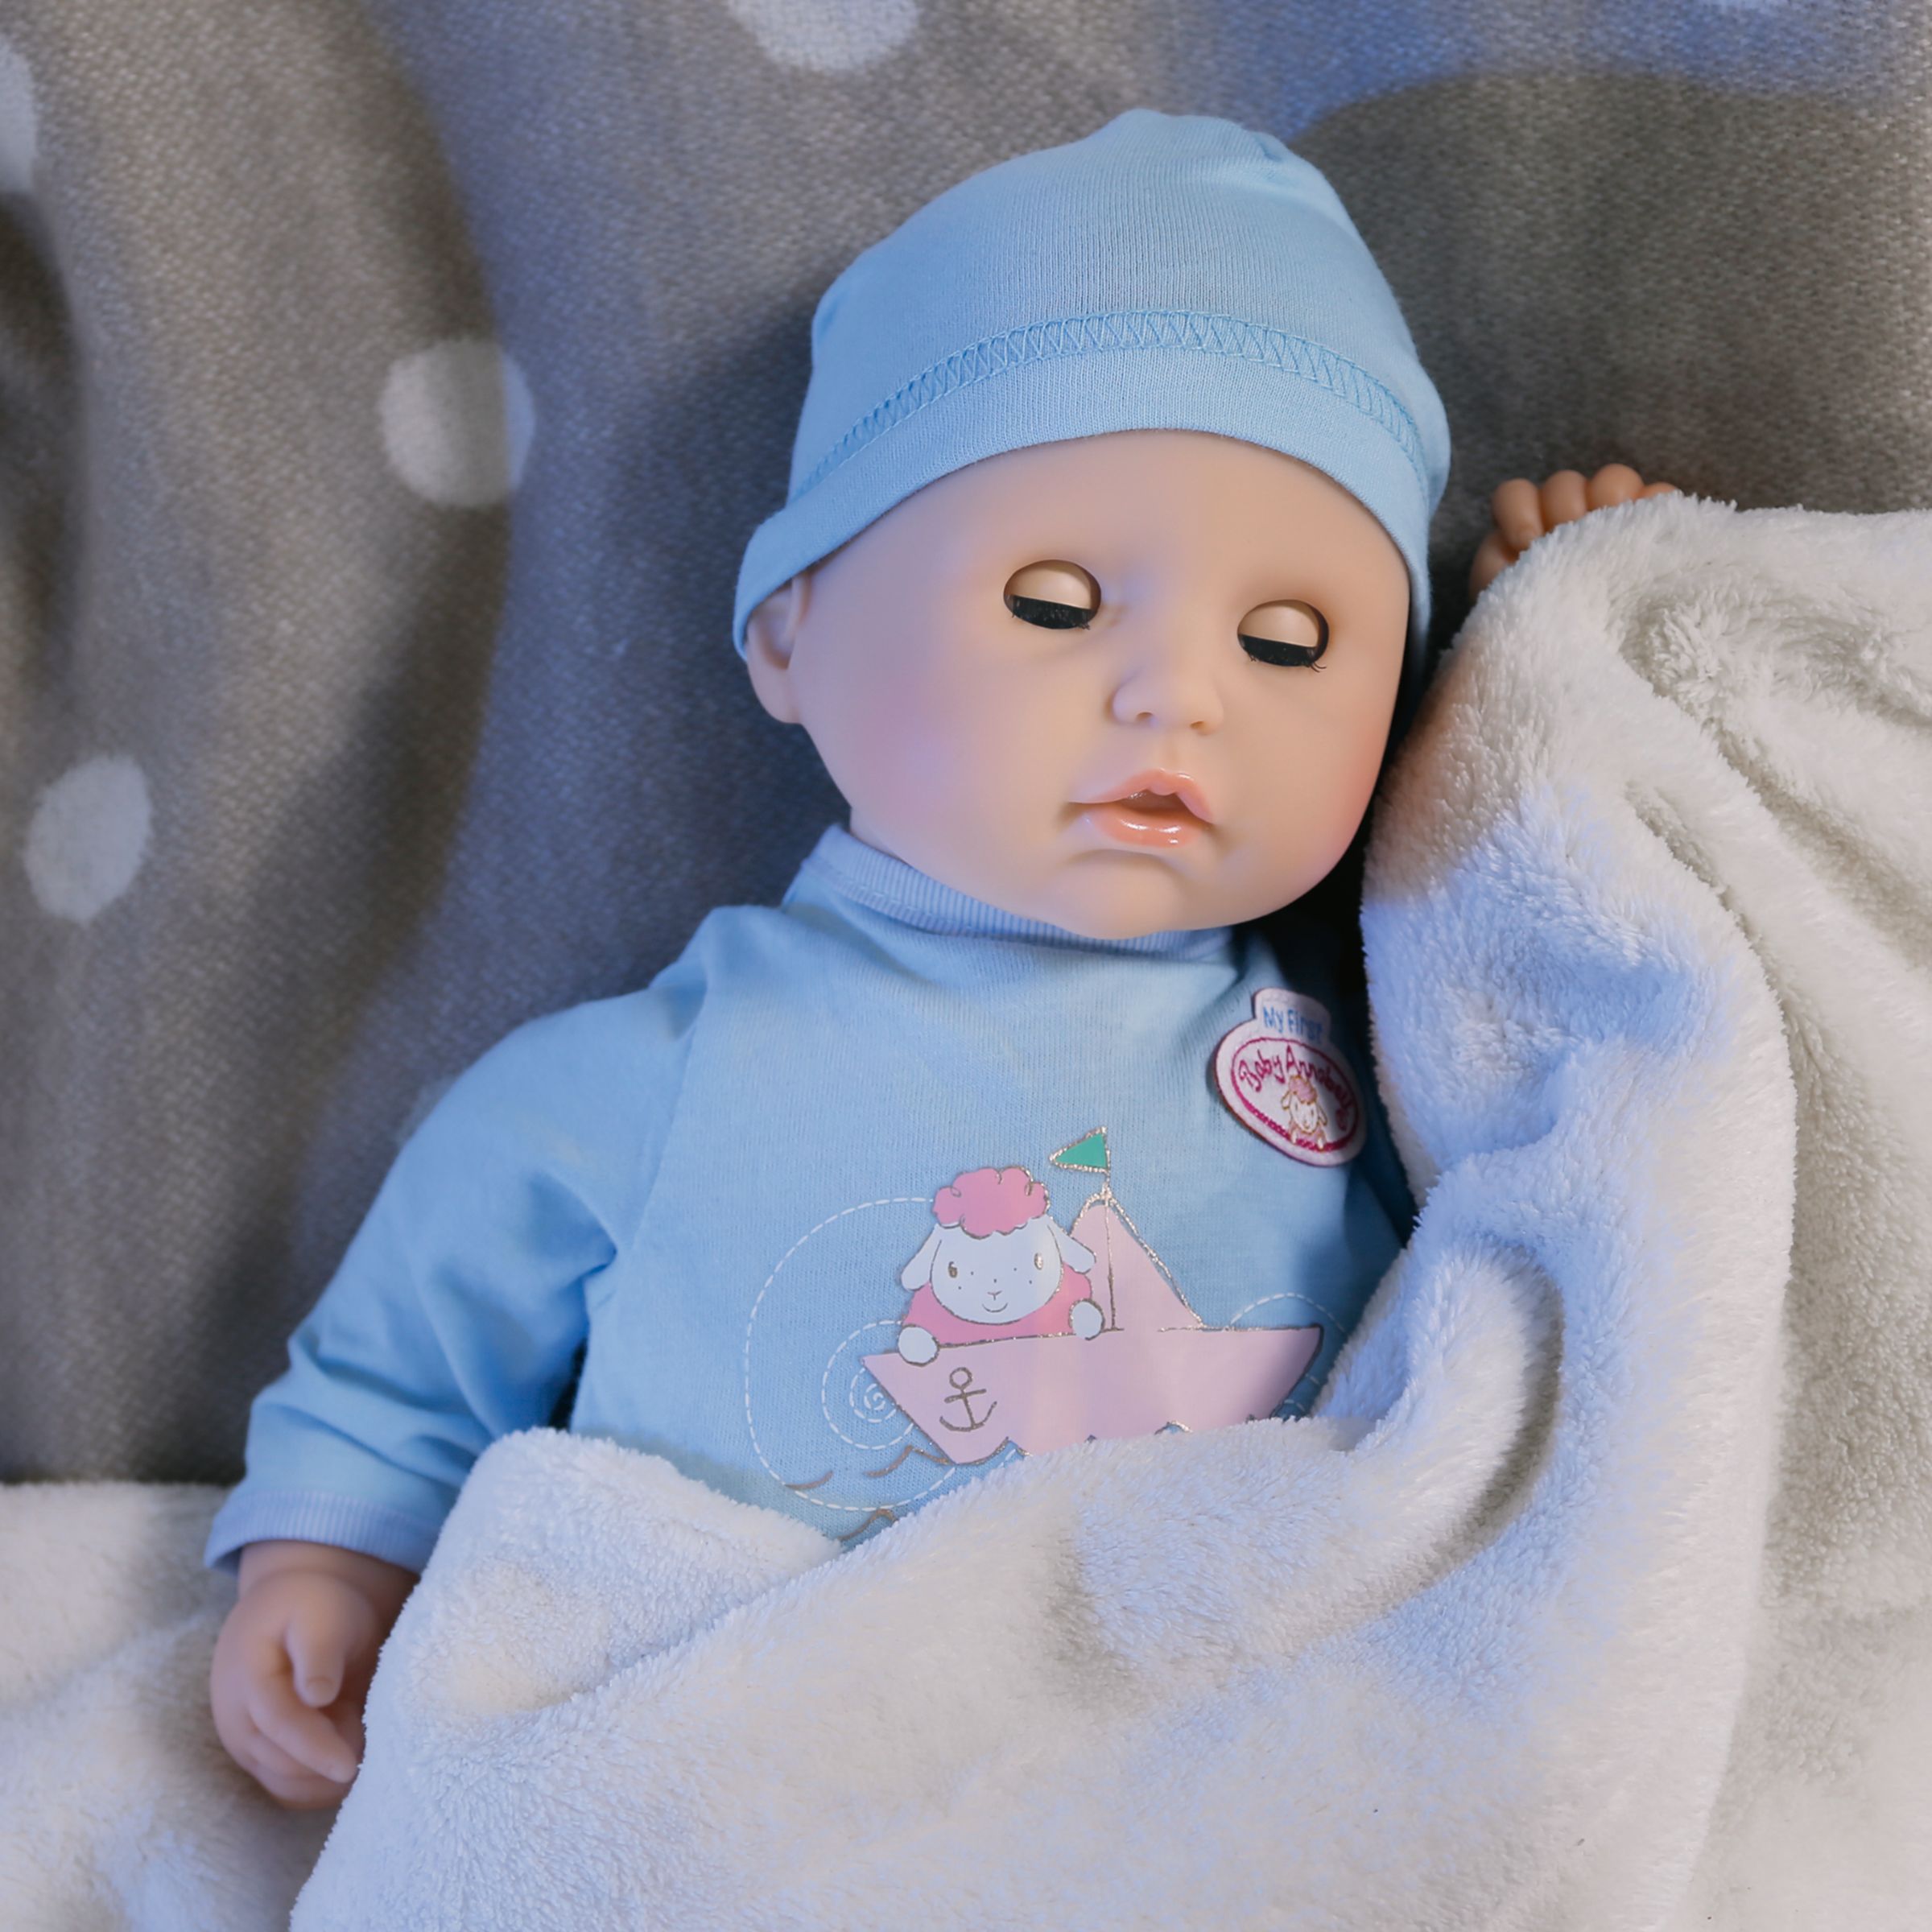 Baby Annabell Sleeping Brother Doll at 